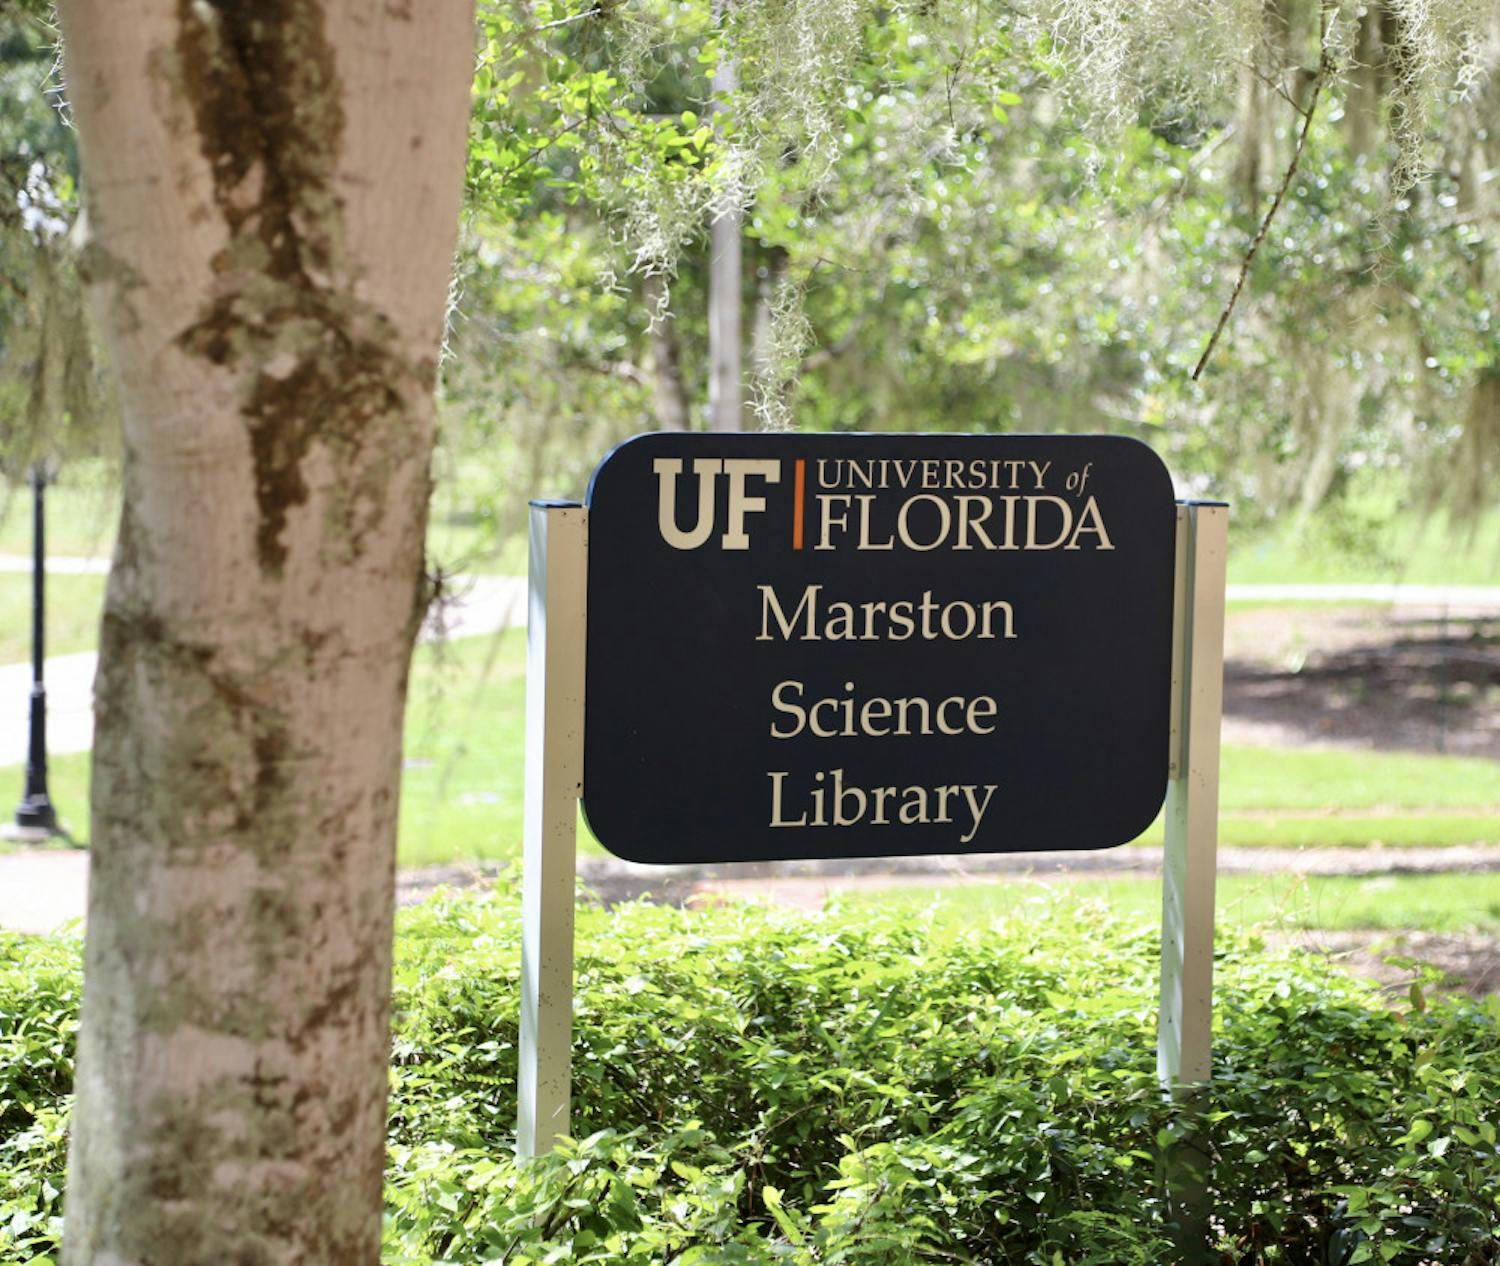 To combat the spread of COVID-19 in public spaces, the UF Smathers libraries have reduced computers, tables, hours and capacities. 